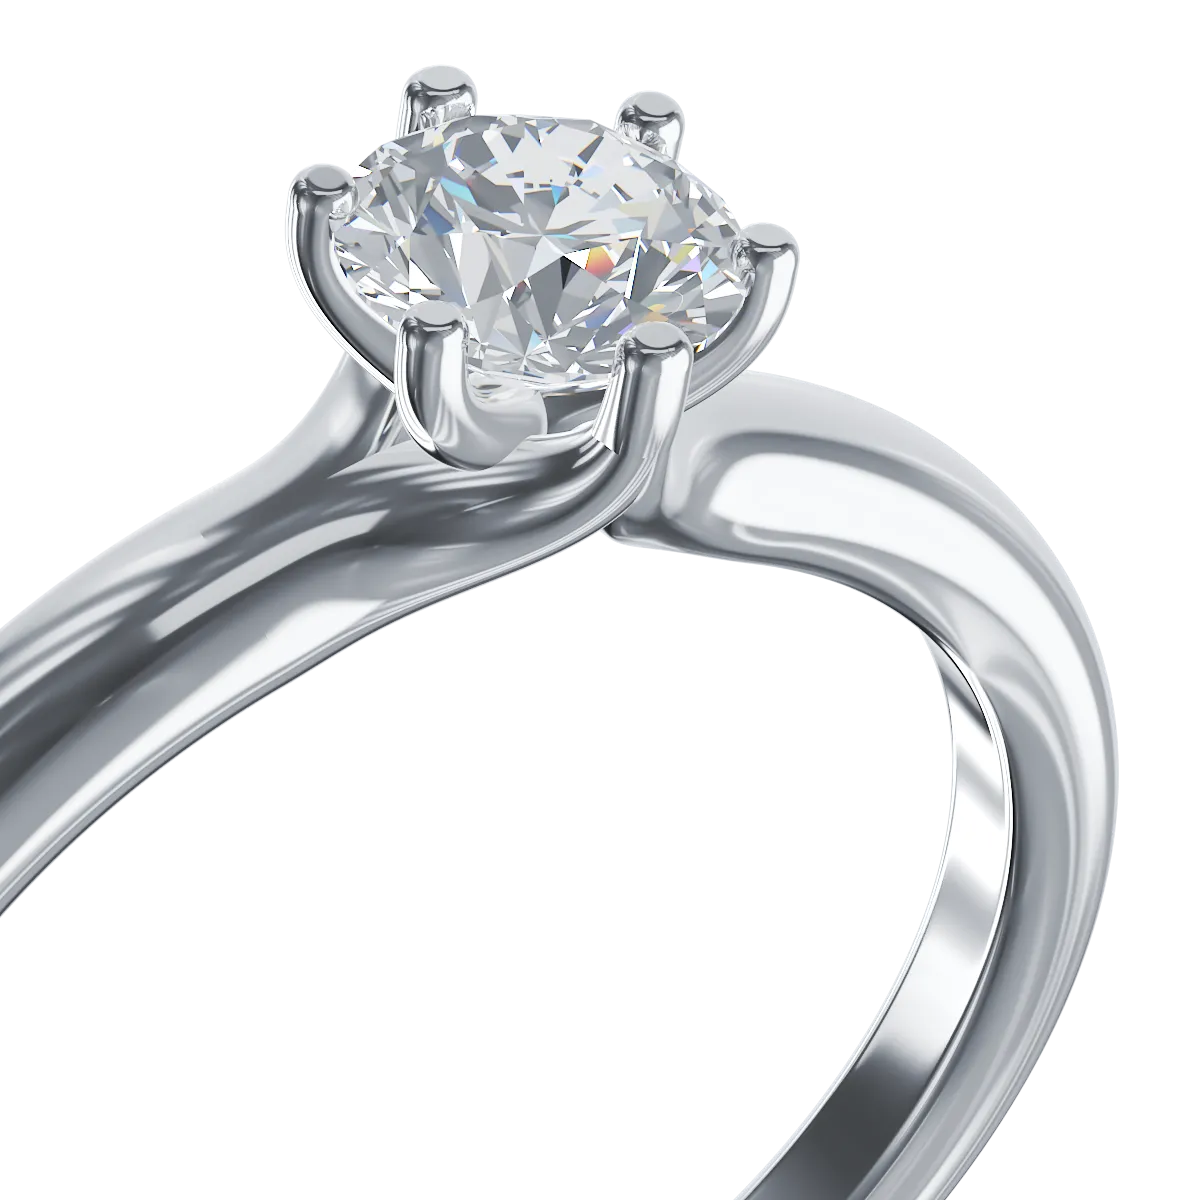 Platinum engagement ring with a 0.4ct solitaire diamond